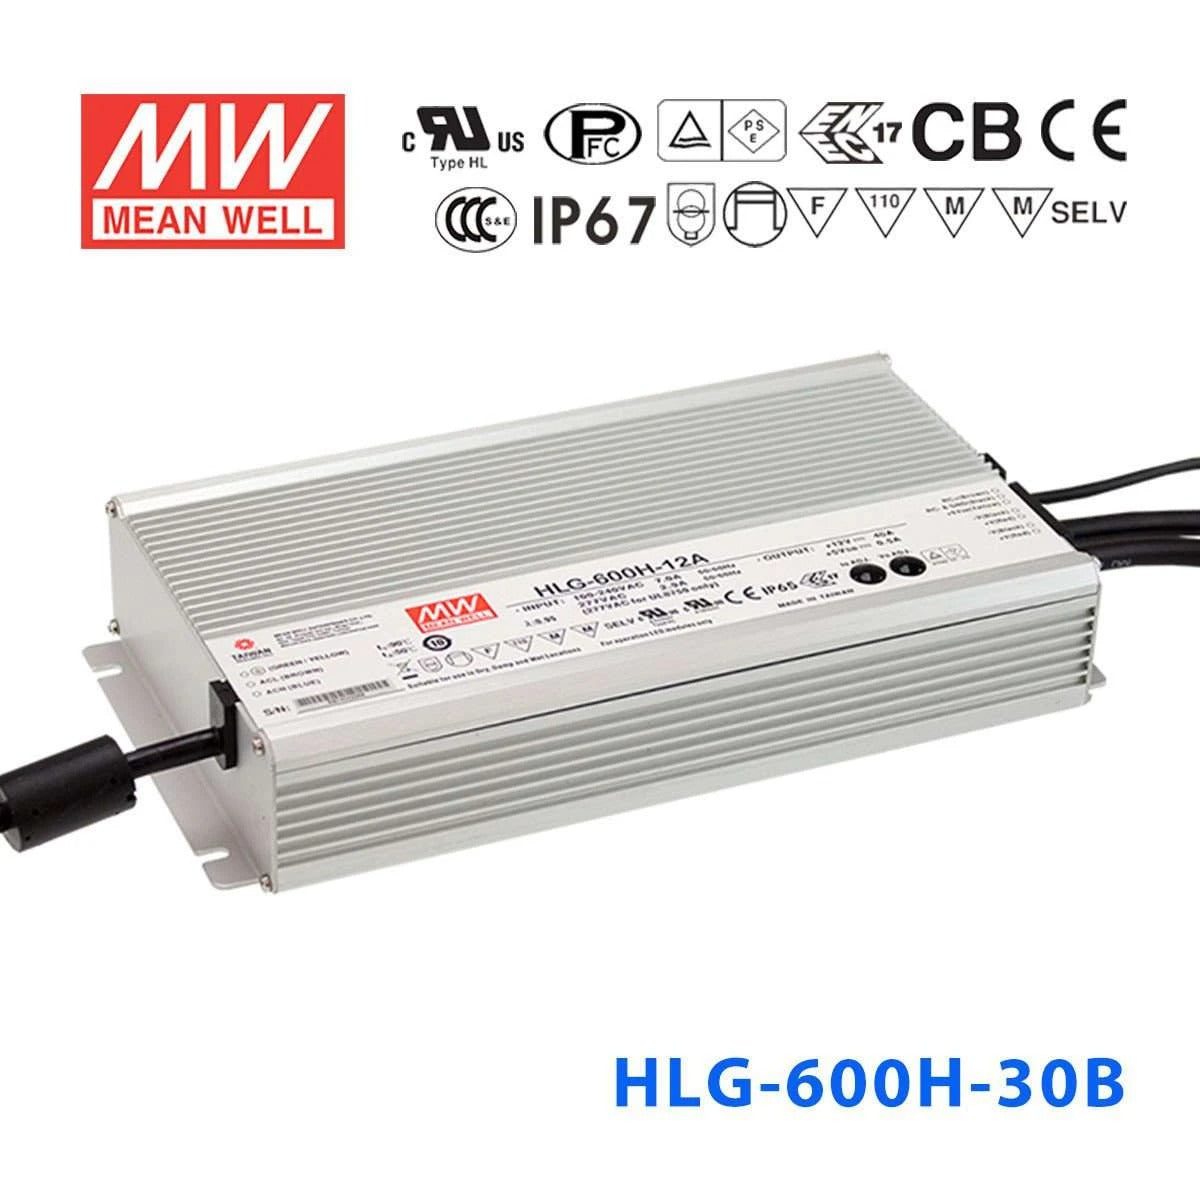 Mean Well HLG-600H-30B Power Supply 600W 30V- Dimmable